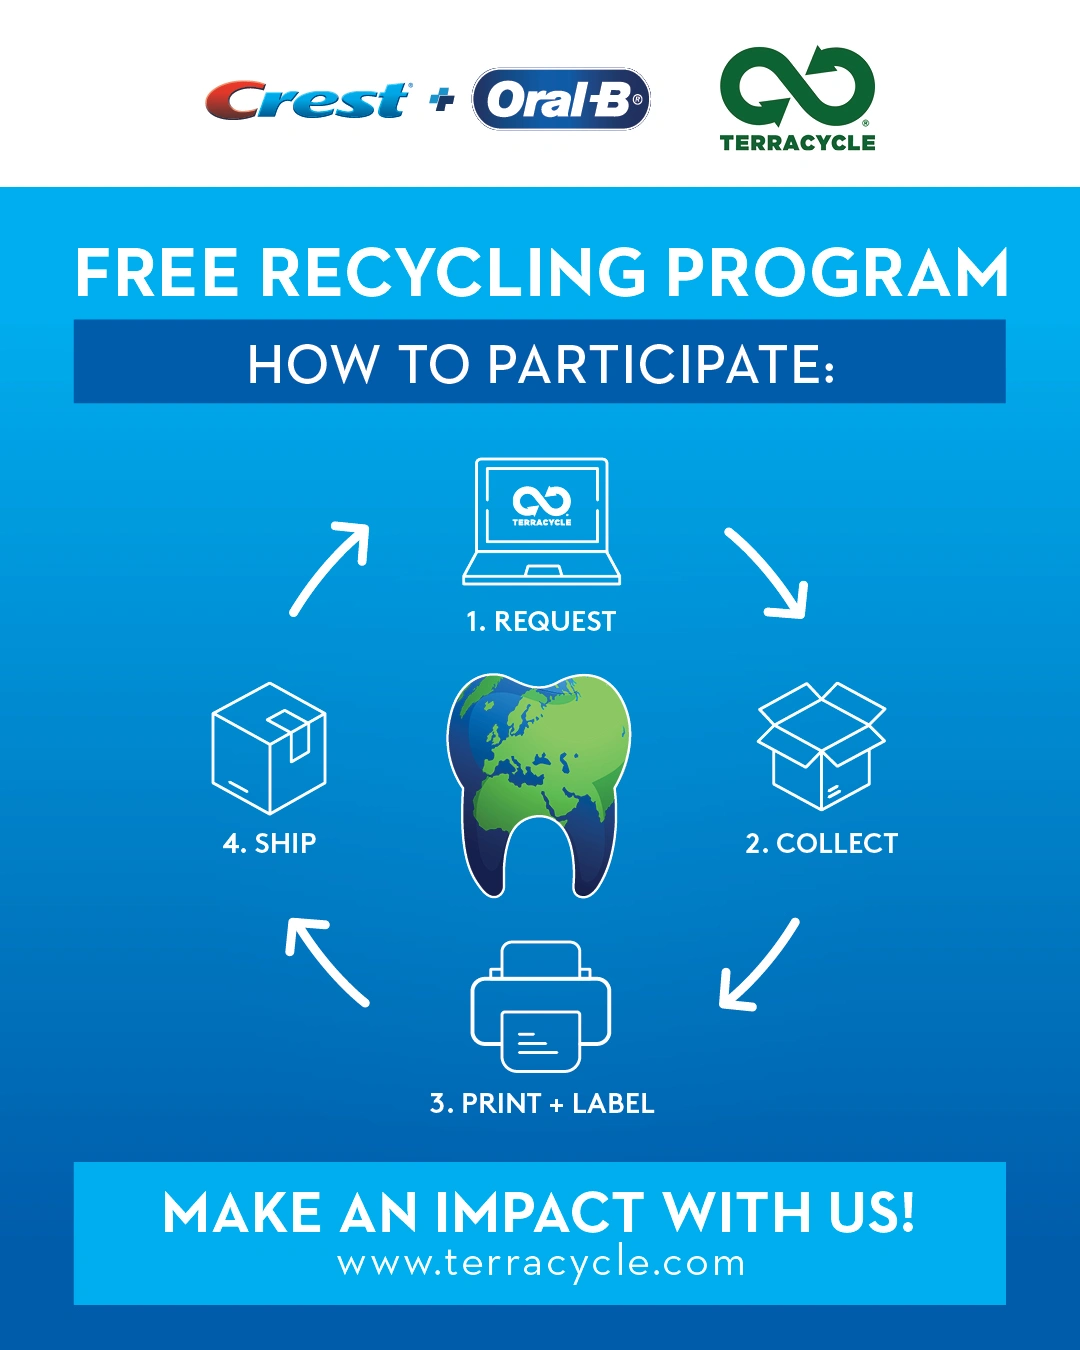 CCH - Instagram Images - TerraCycle Recycling Program